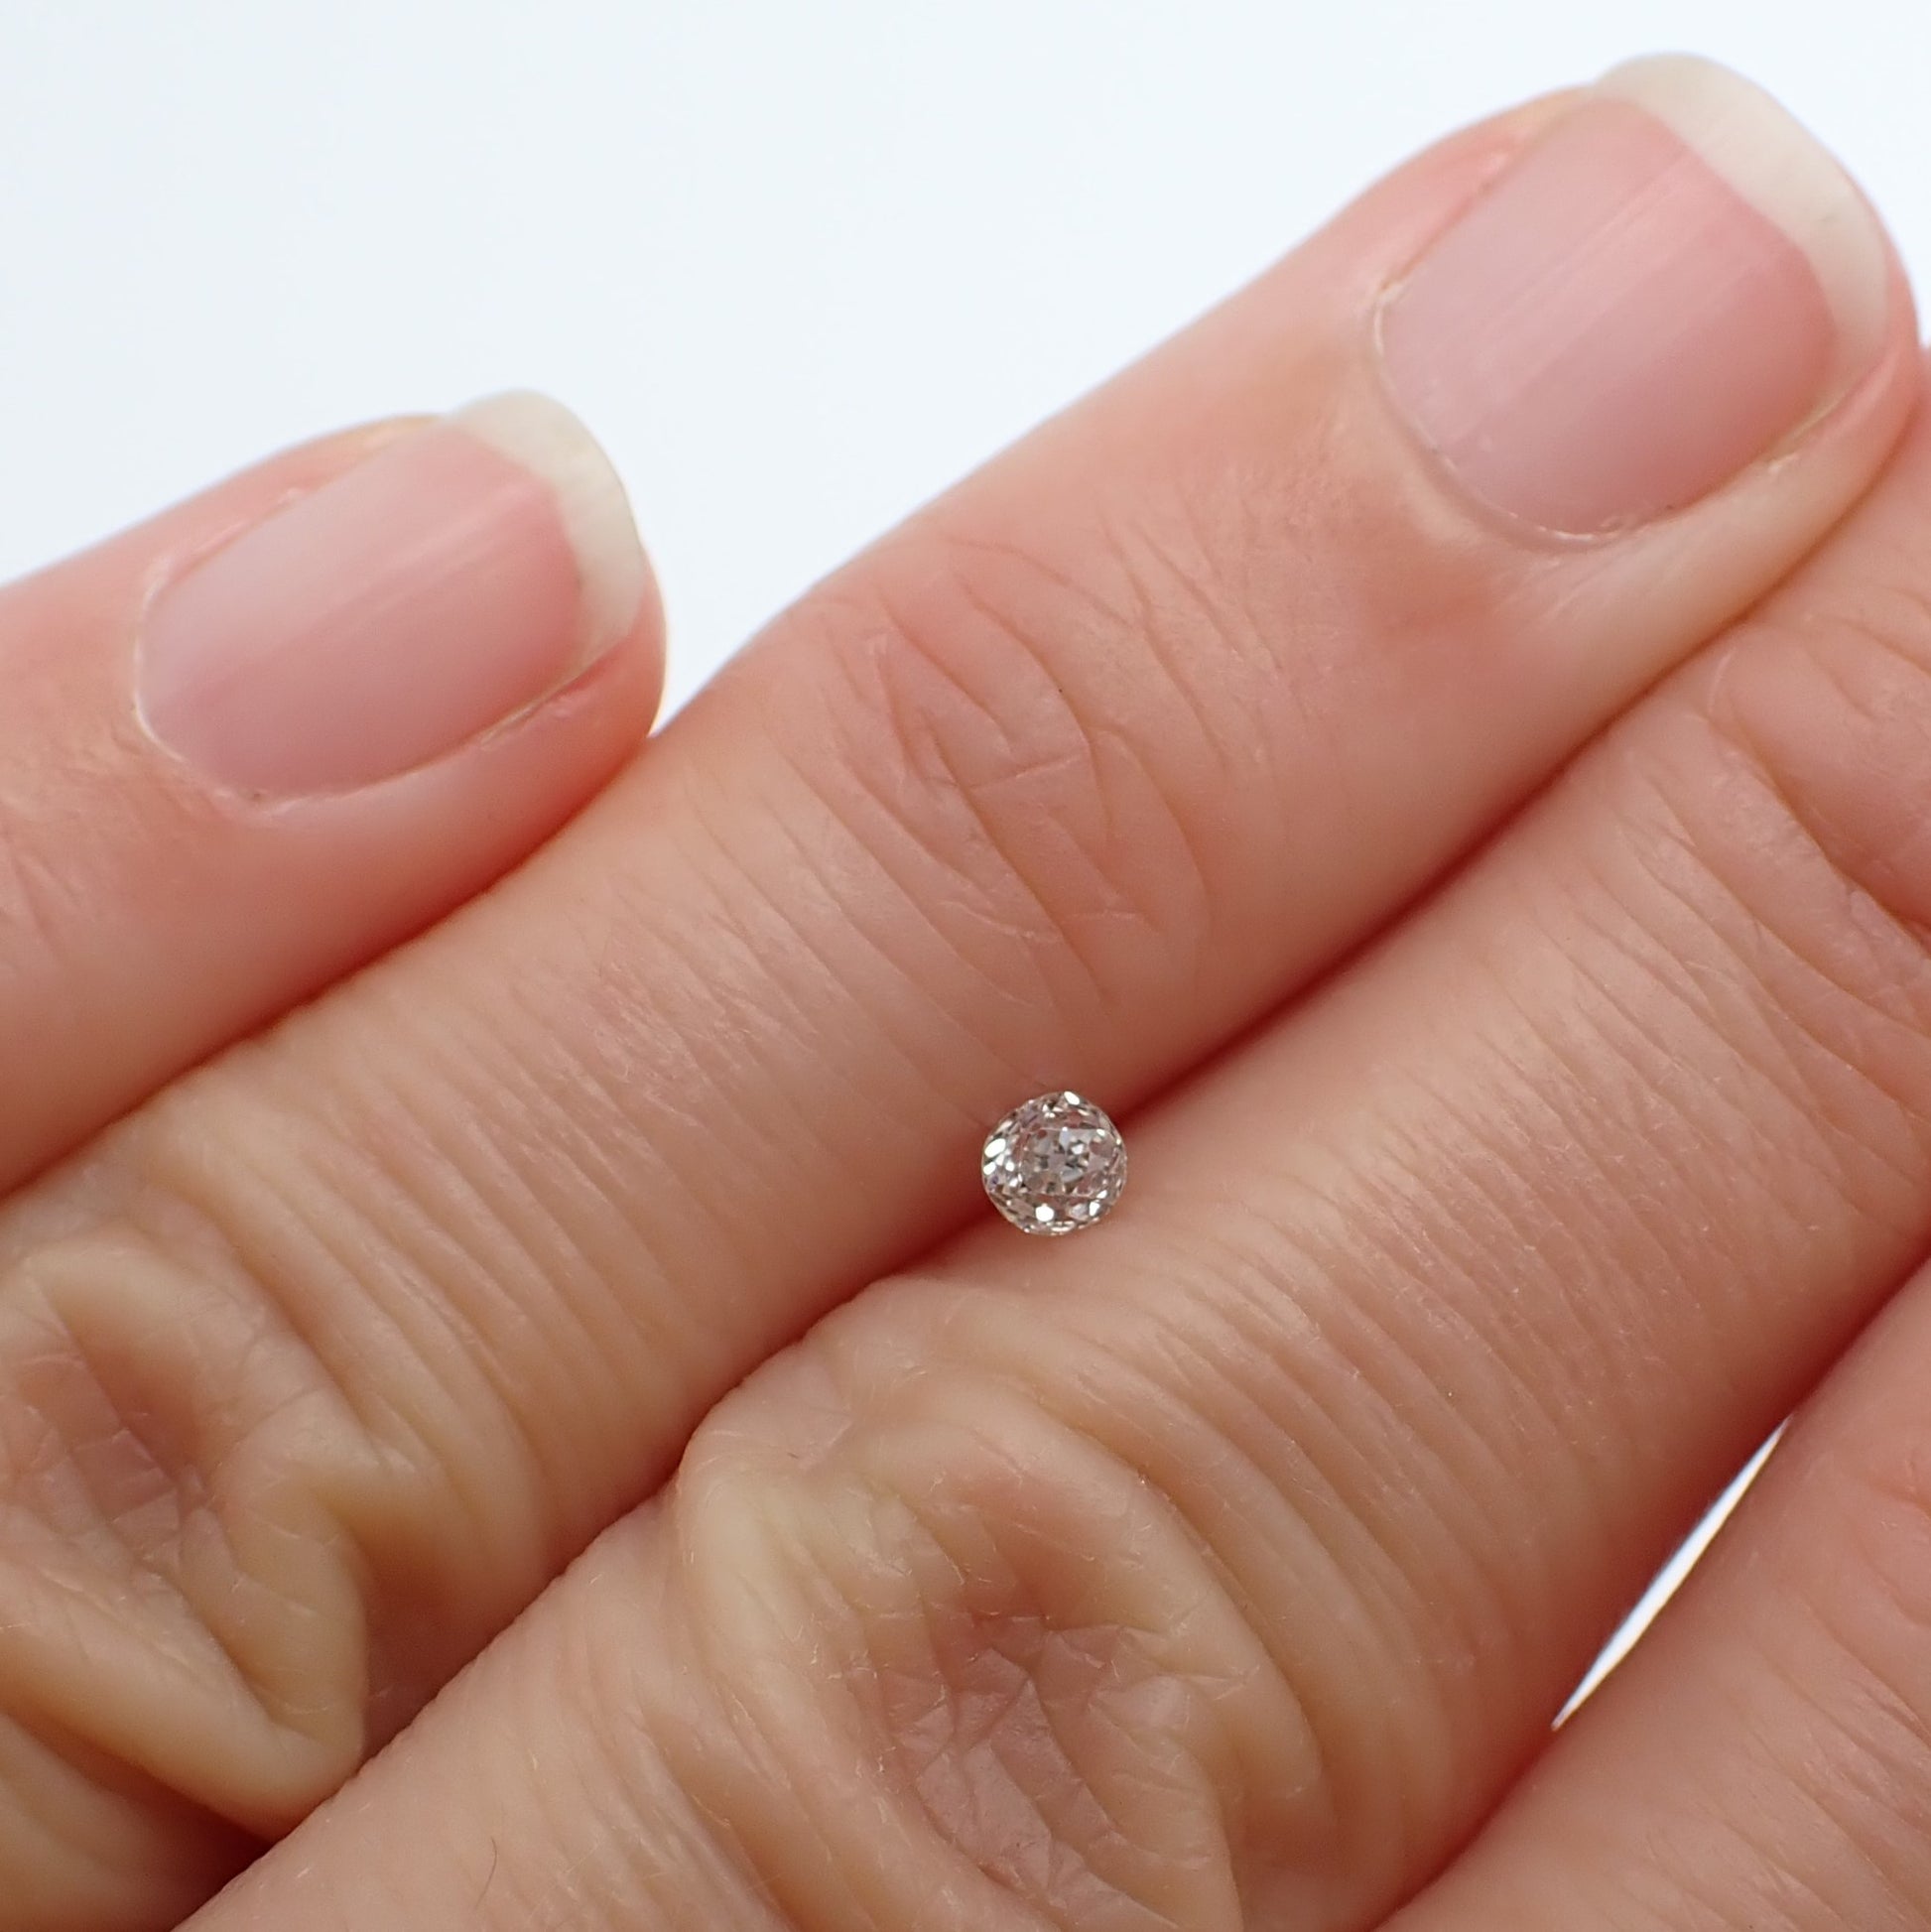 Round colourless antique diamond sitting between the left hand ring and middle fingers